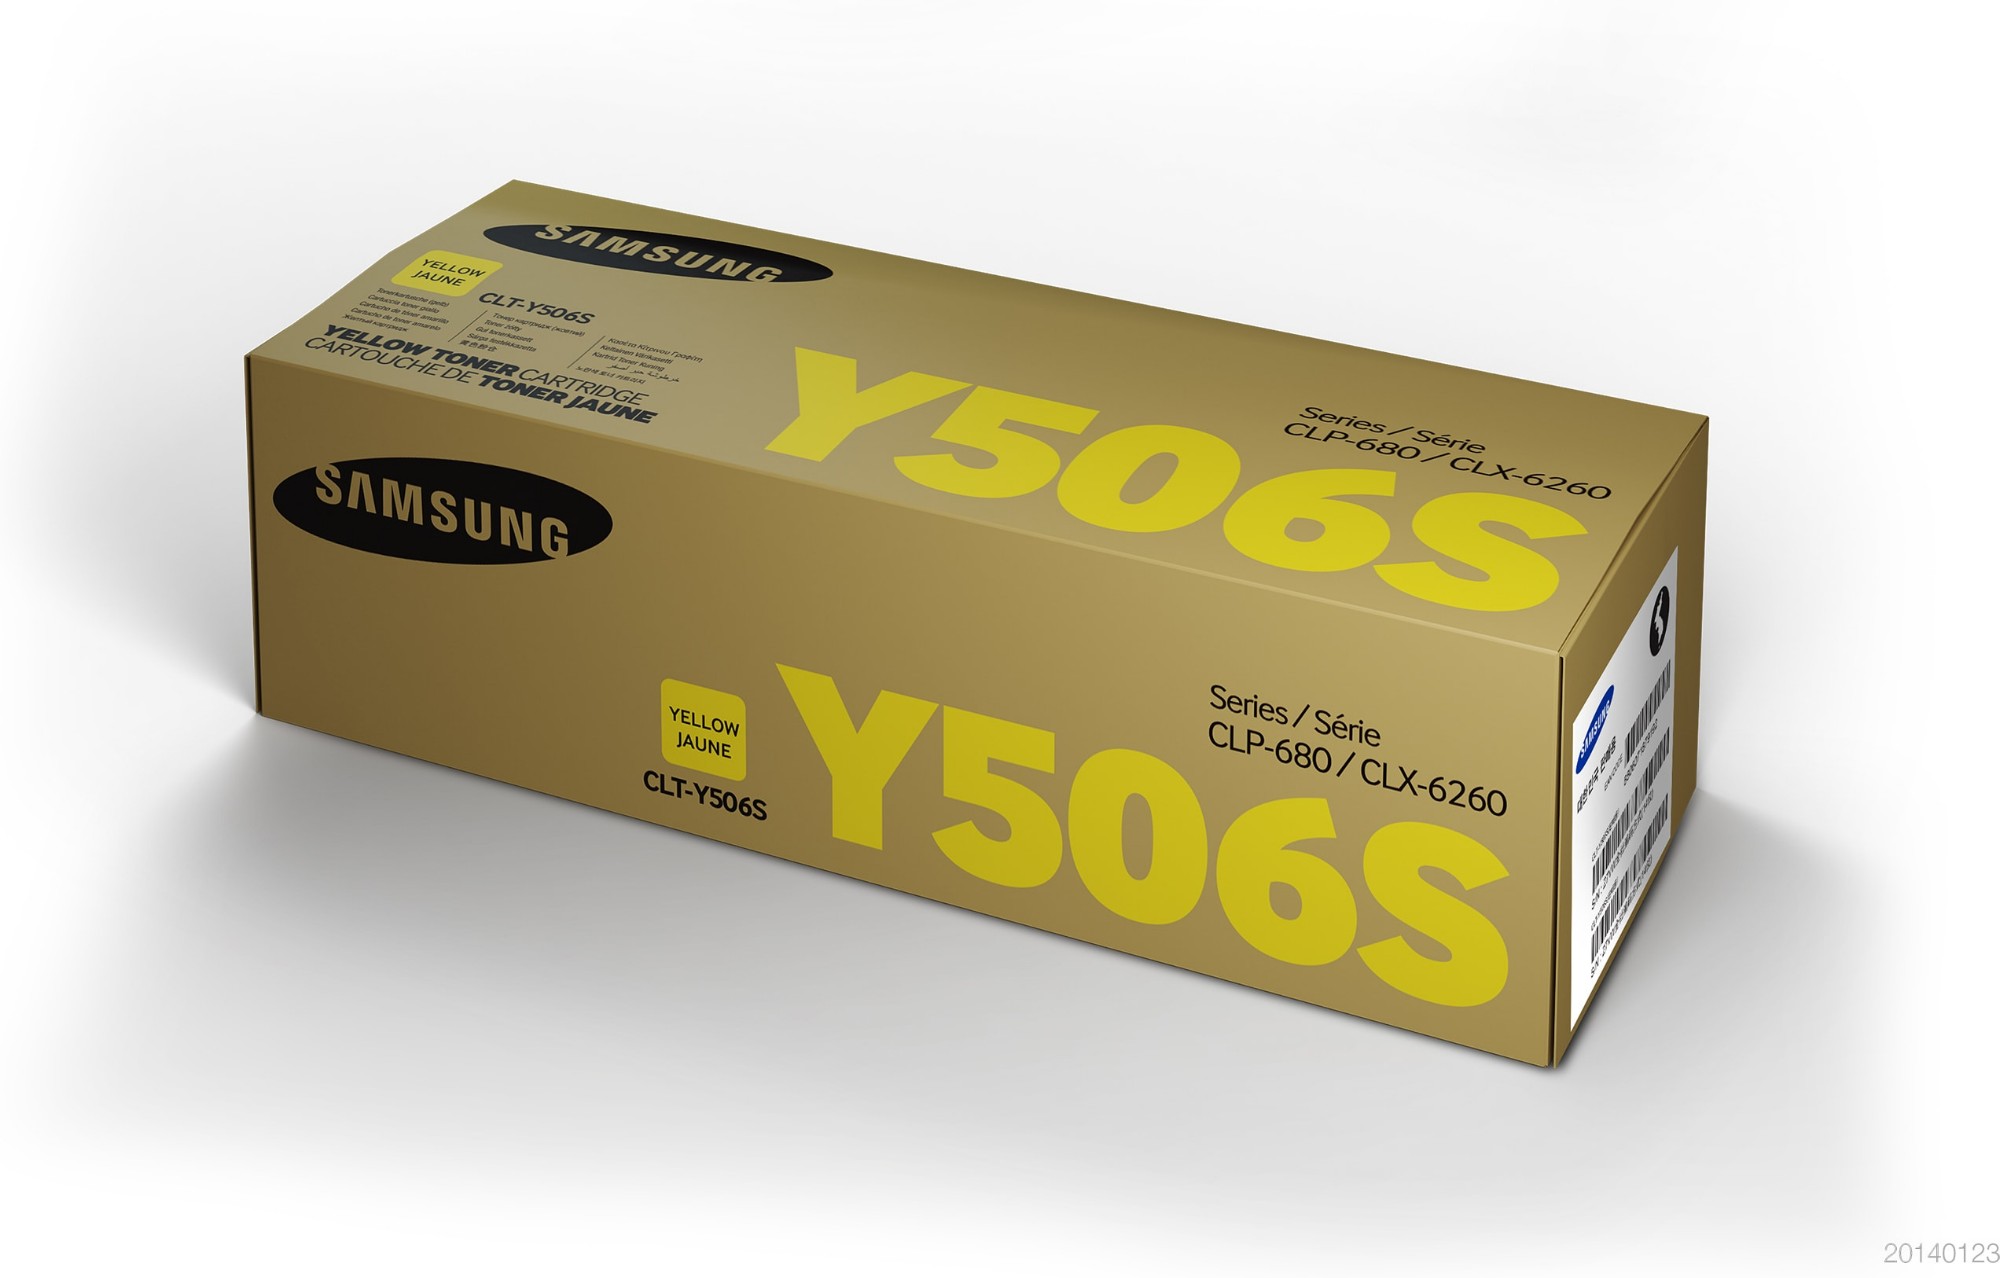 HP SU524A/CLT-Y506S Toner cartridge yellow, 1.5K pages ISO/IEC 19798 for Samsung CLP-680